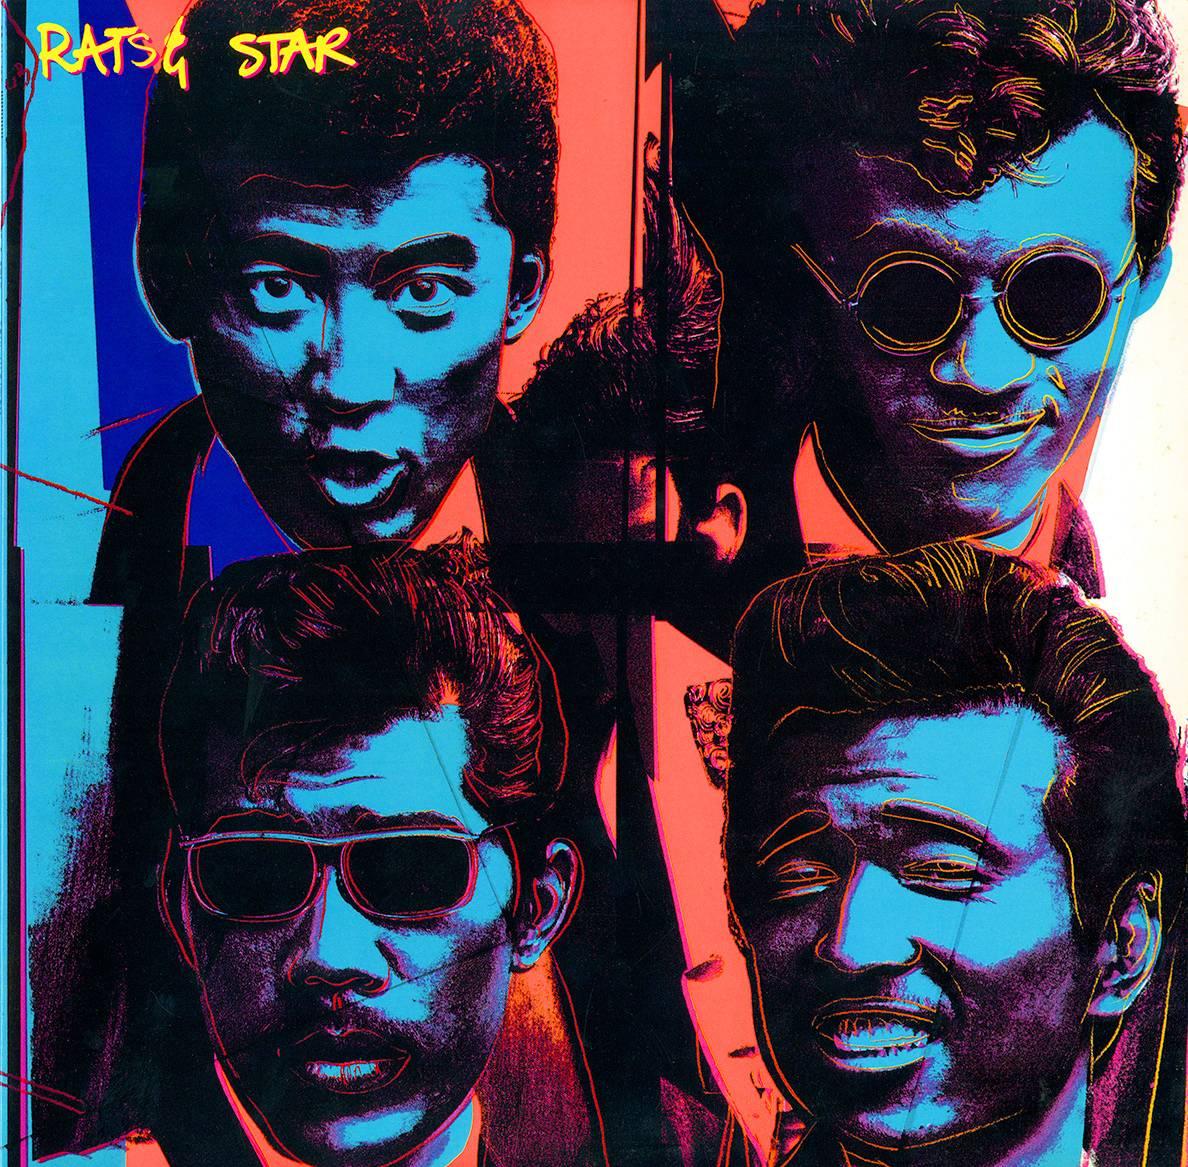 1983 1st pressing, Rats & Stars Vinyl Album featuring Original Cover Art by Andy Warhol. One of the rarest of all 1980's Warhol illustrations. 

Cover: Off-set print of Warhol's original Screen Print from the same year
12 x 12 Inches (30.48 x 30.48